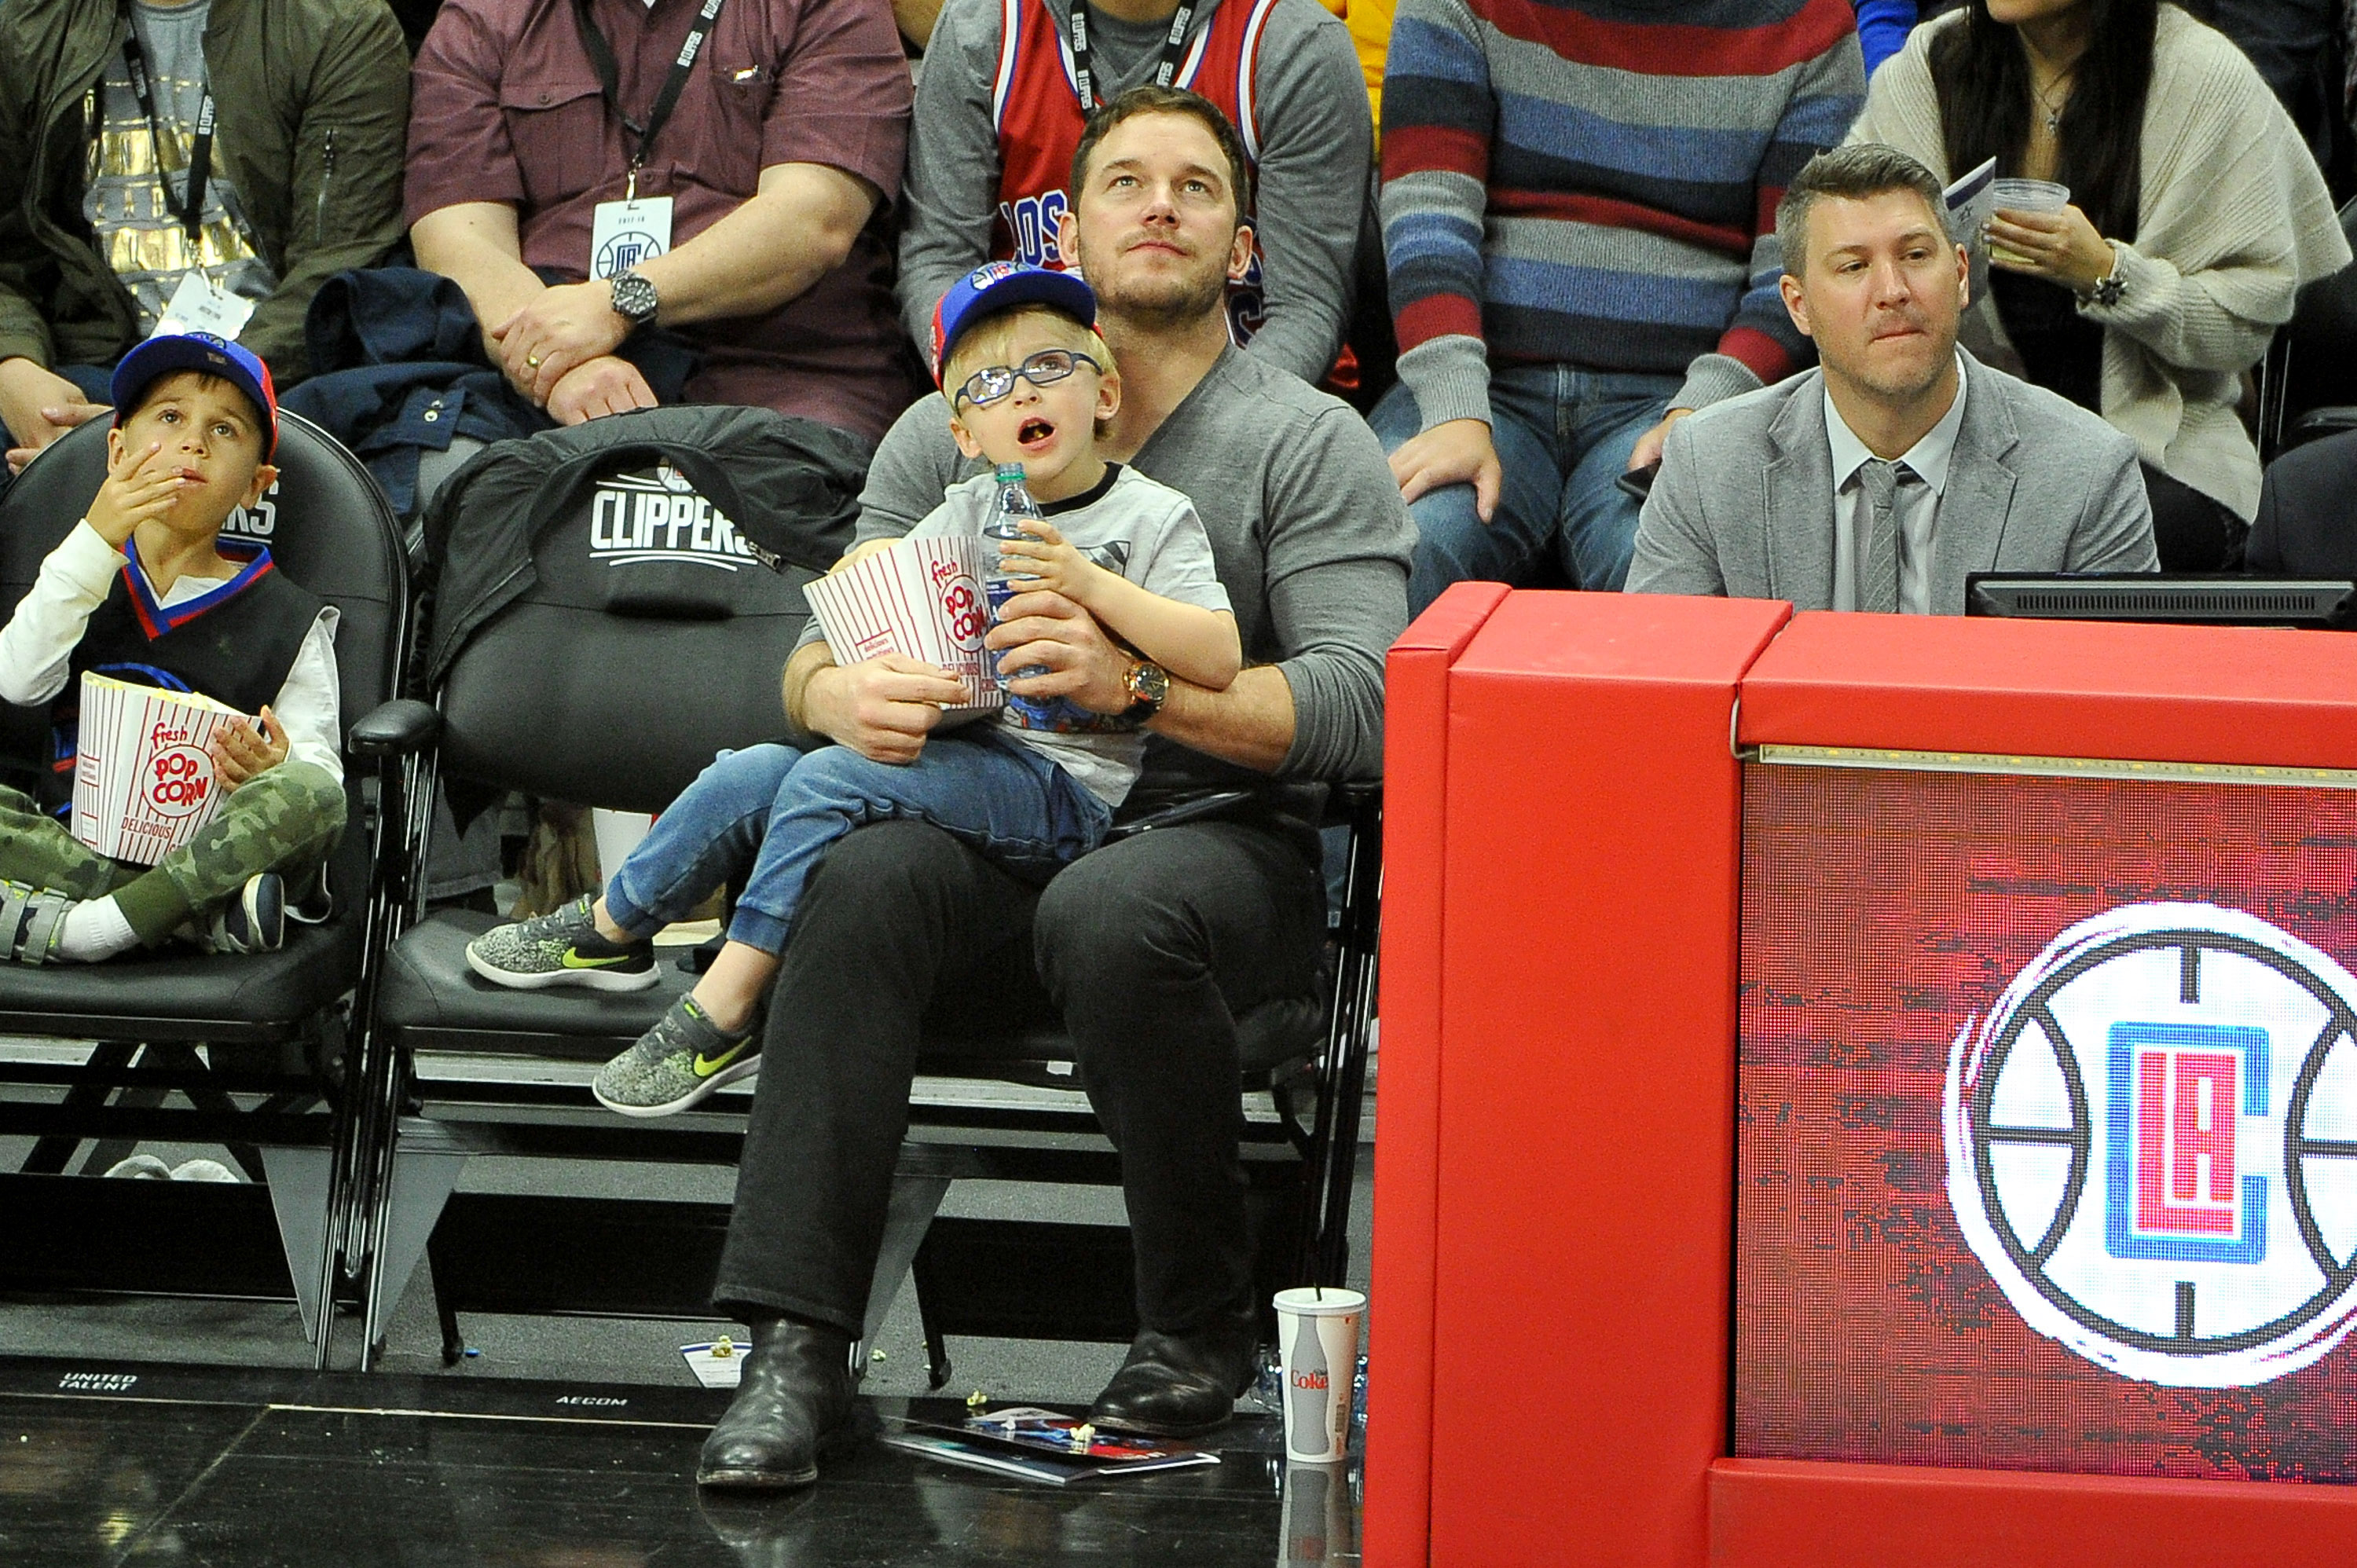 Chris Pratt and Jack Pratt attend a basketball game between the Los Angeles Clippers and the Minnesota Timberwolves at Staples Center in Los Angeles, California on December 6, 2017. | Source: Getty Images